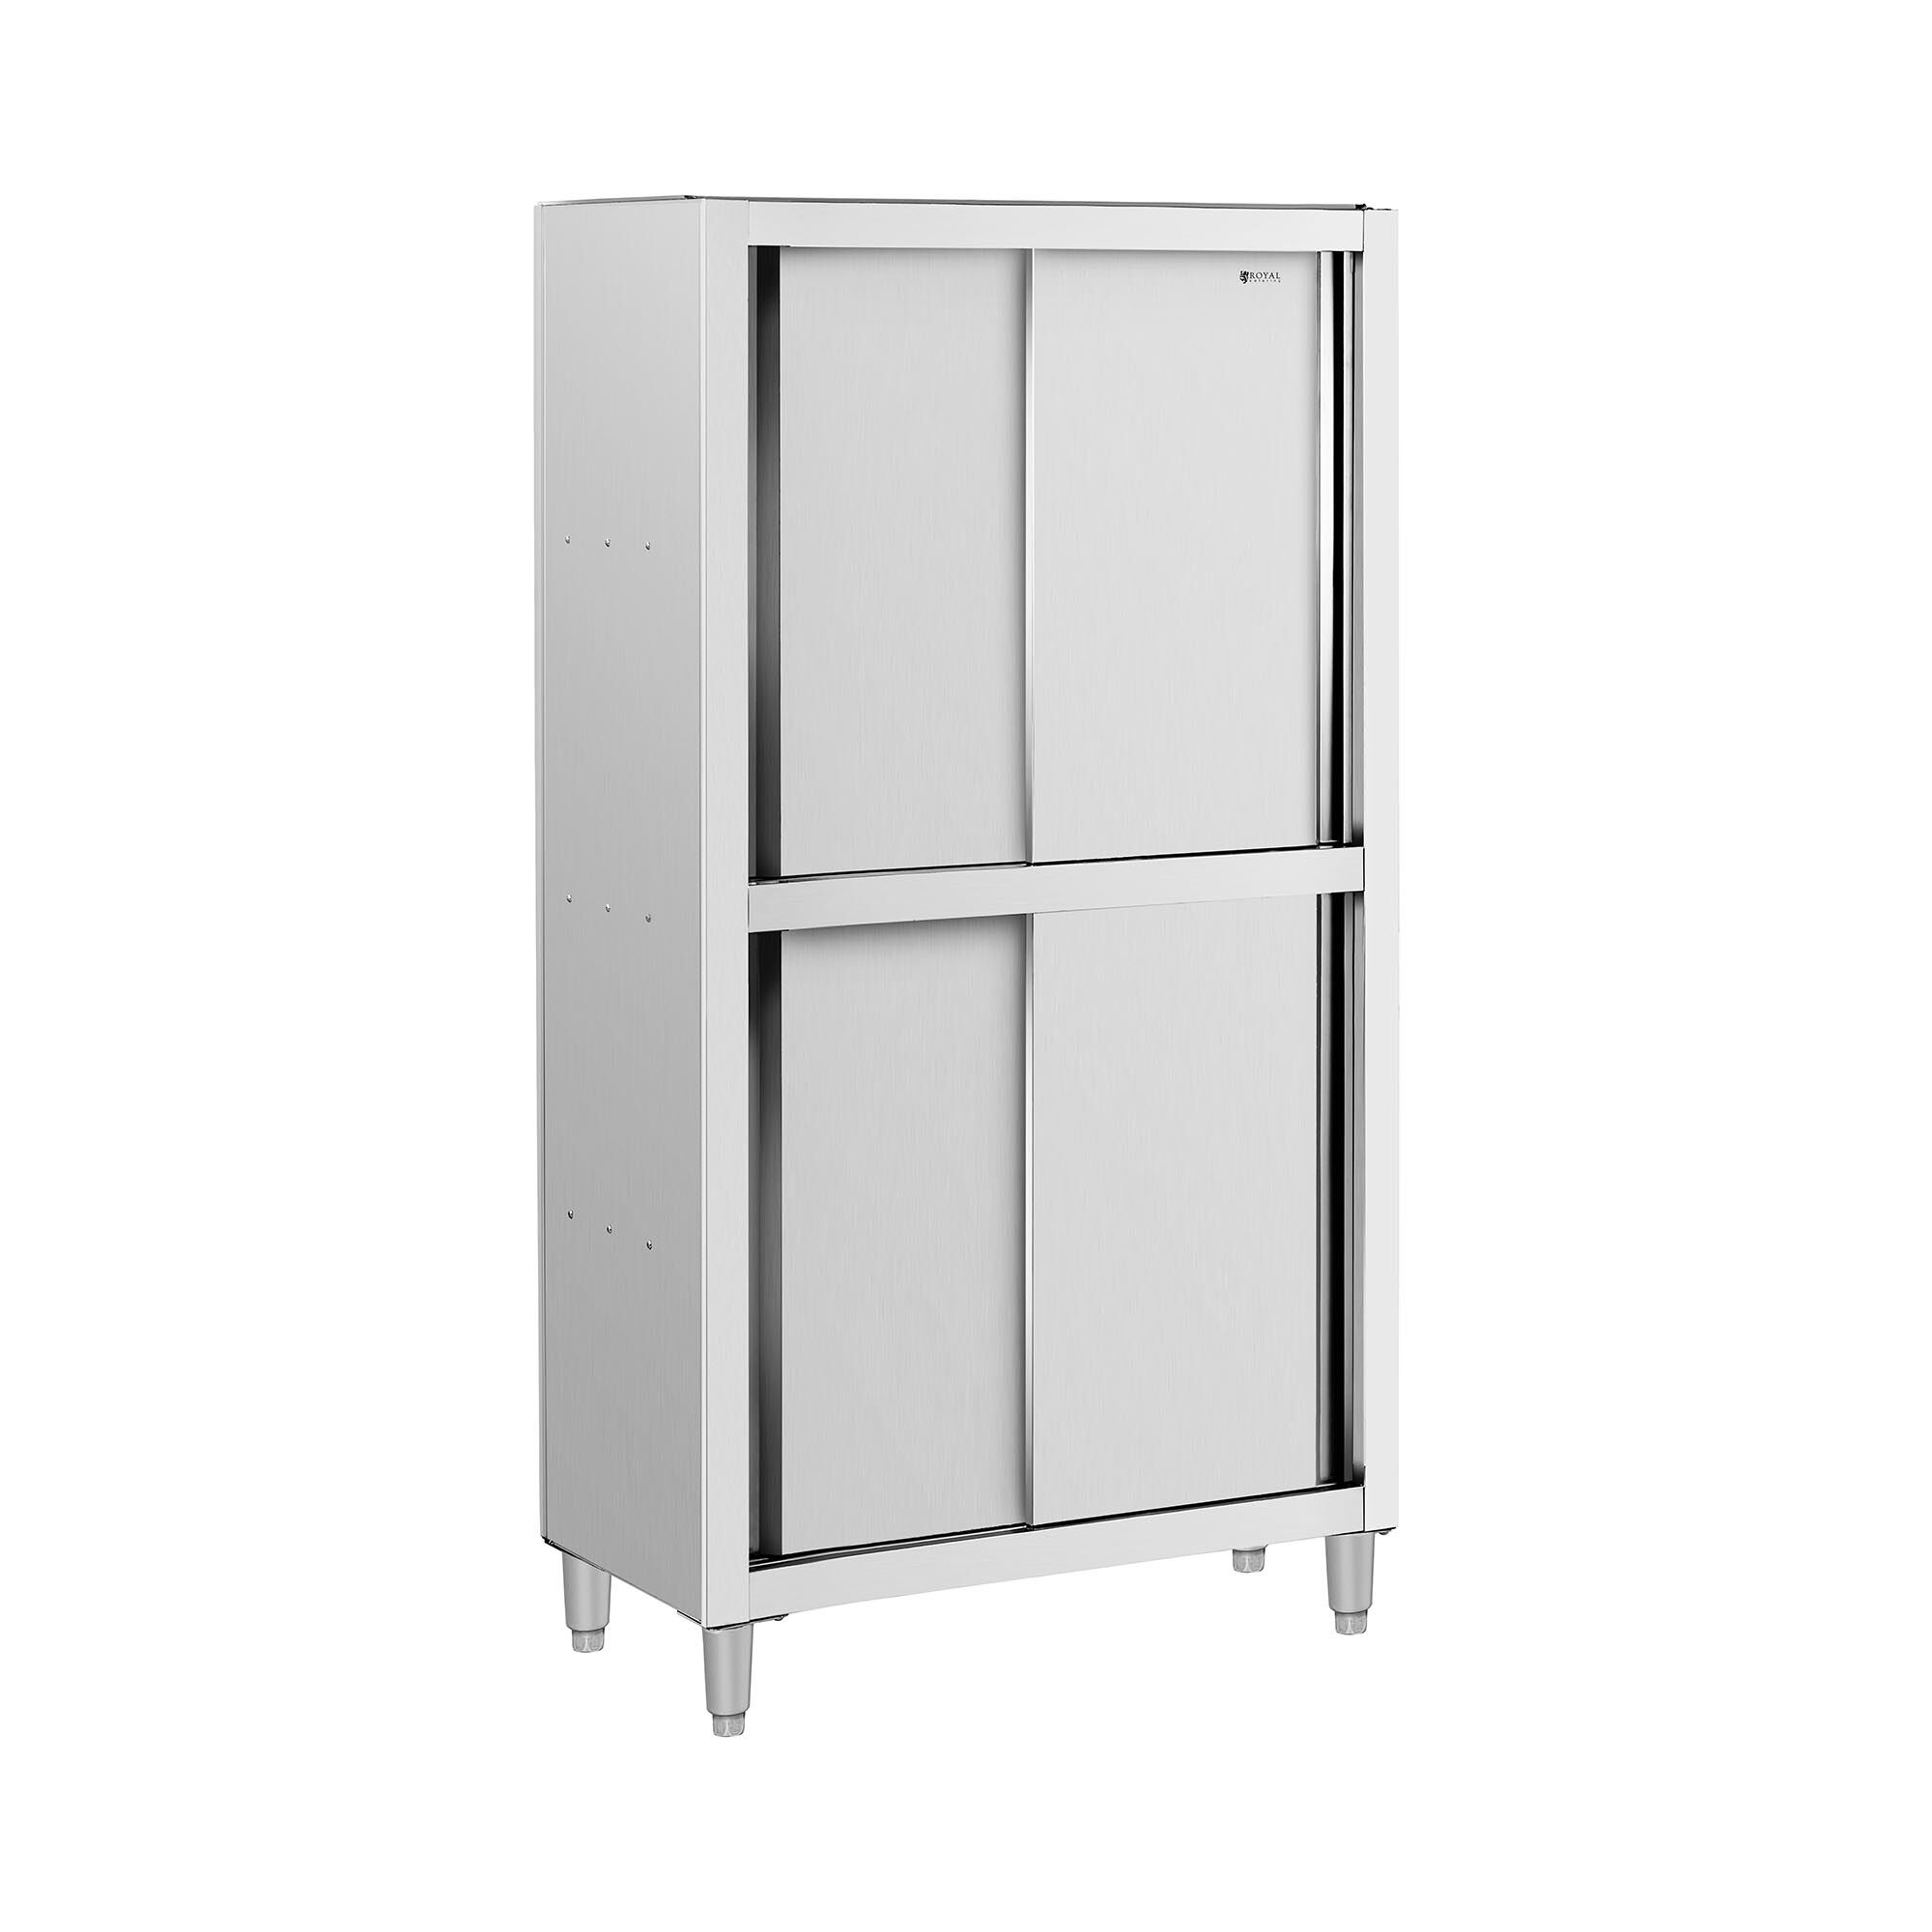 Royal Catering Armoire inox - 1 000 x 500 x 1 800 mm - Royal Catering RCDC-100